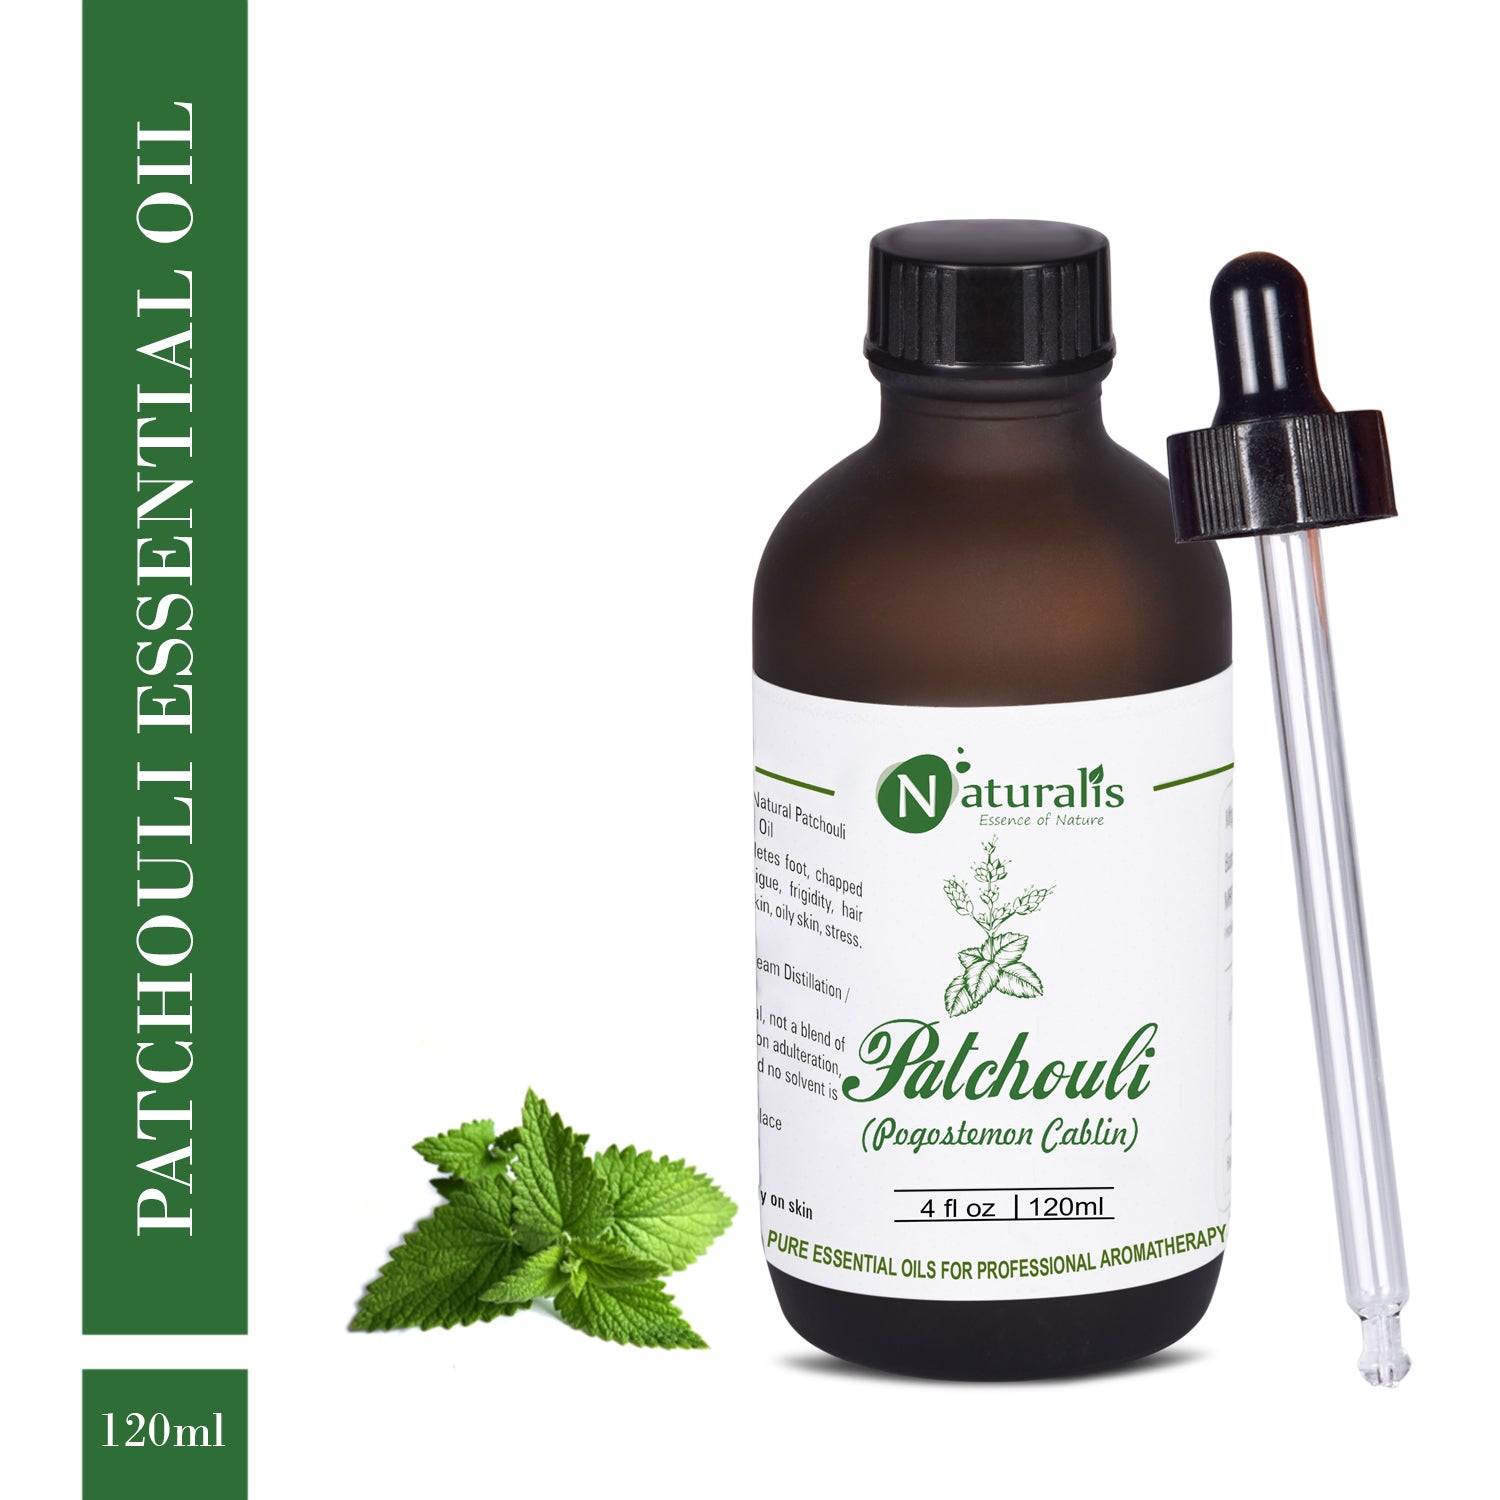 Patchouli Essential Oil by Naturalis - Pure & Natural - Naturalis